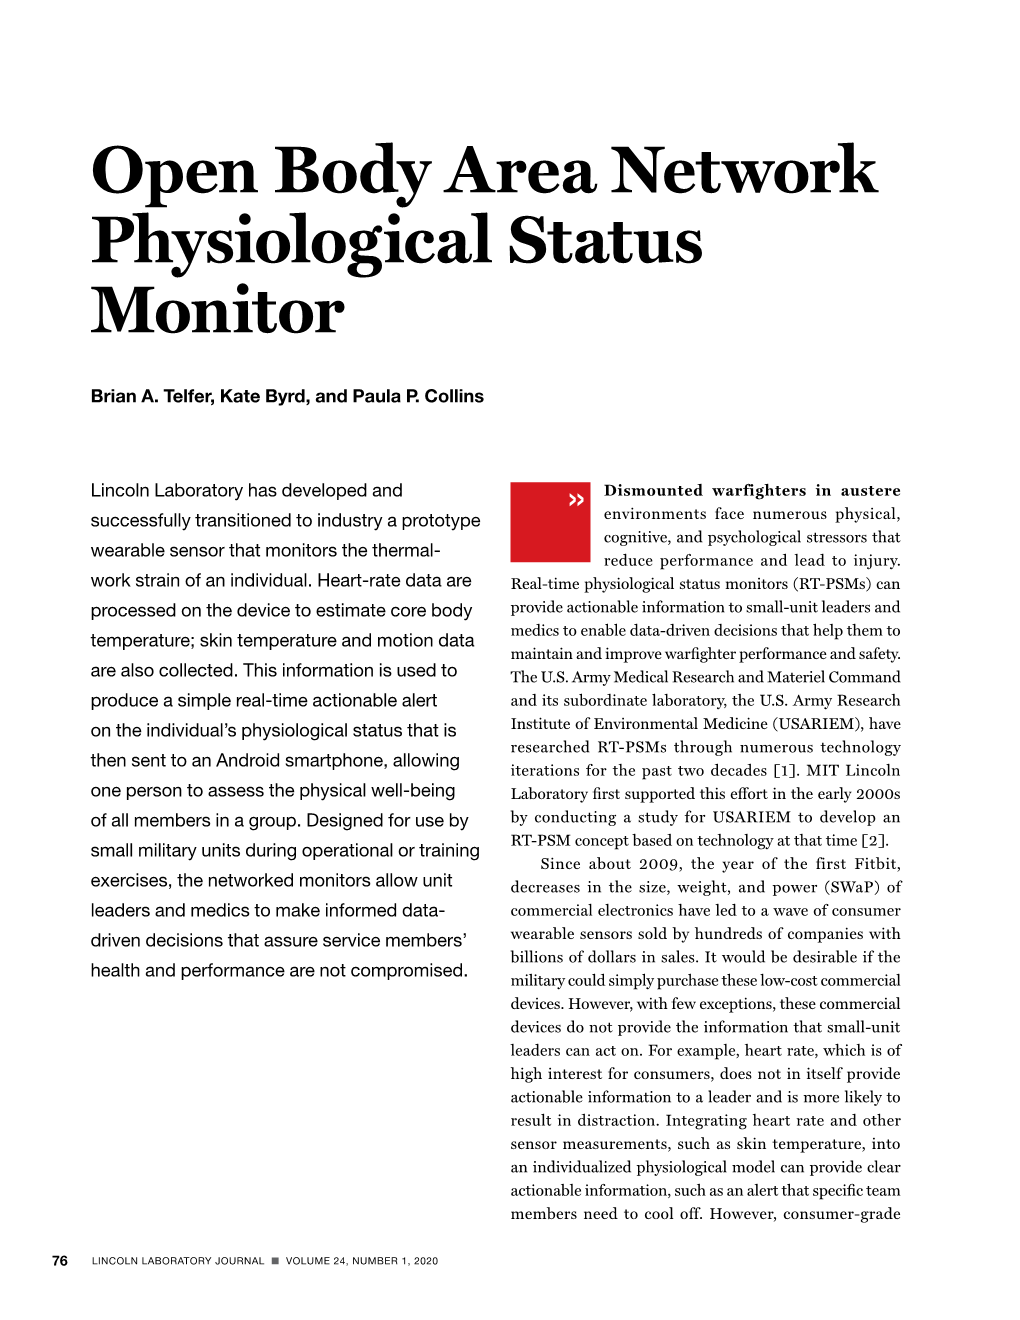 Open Body Area Network Physiological Status Monitor